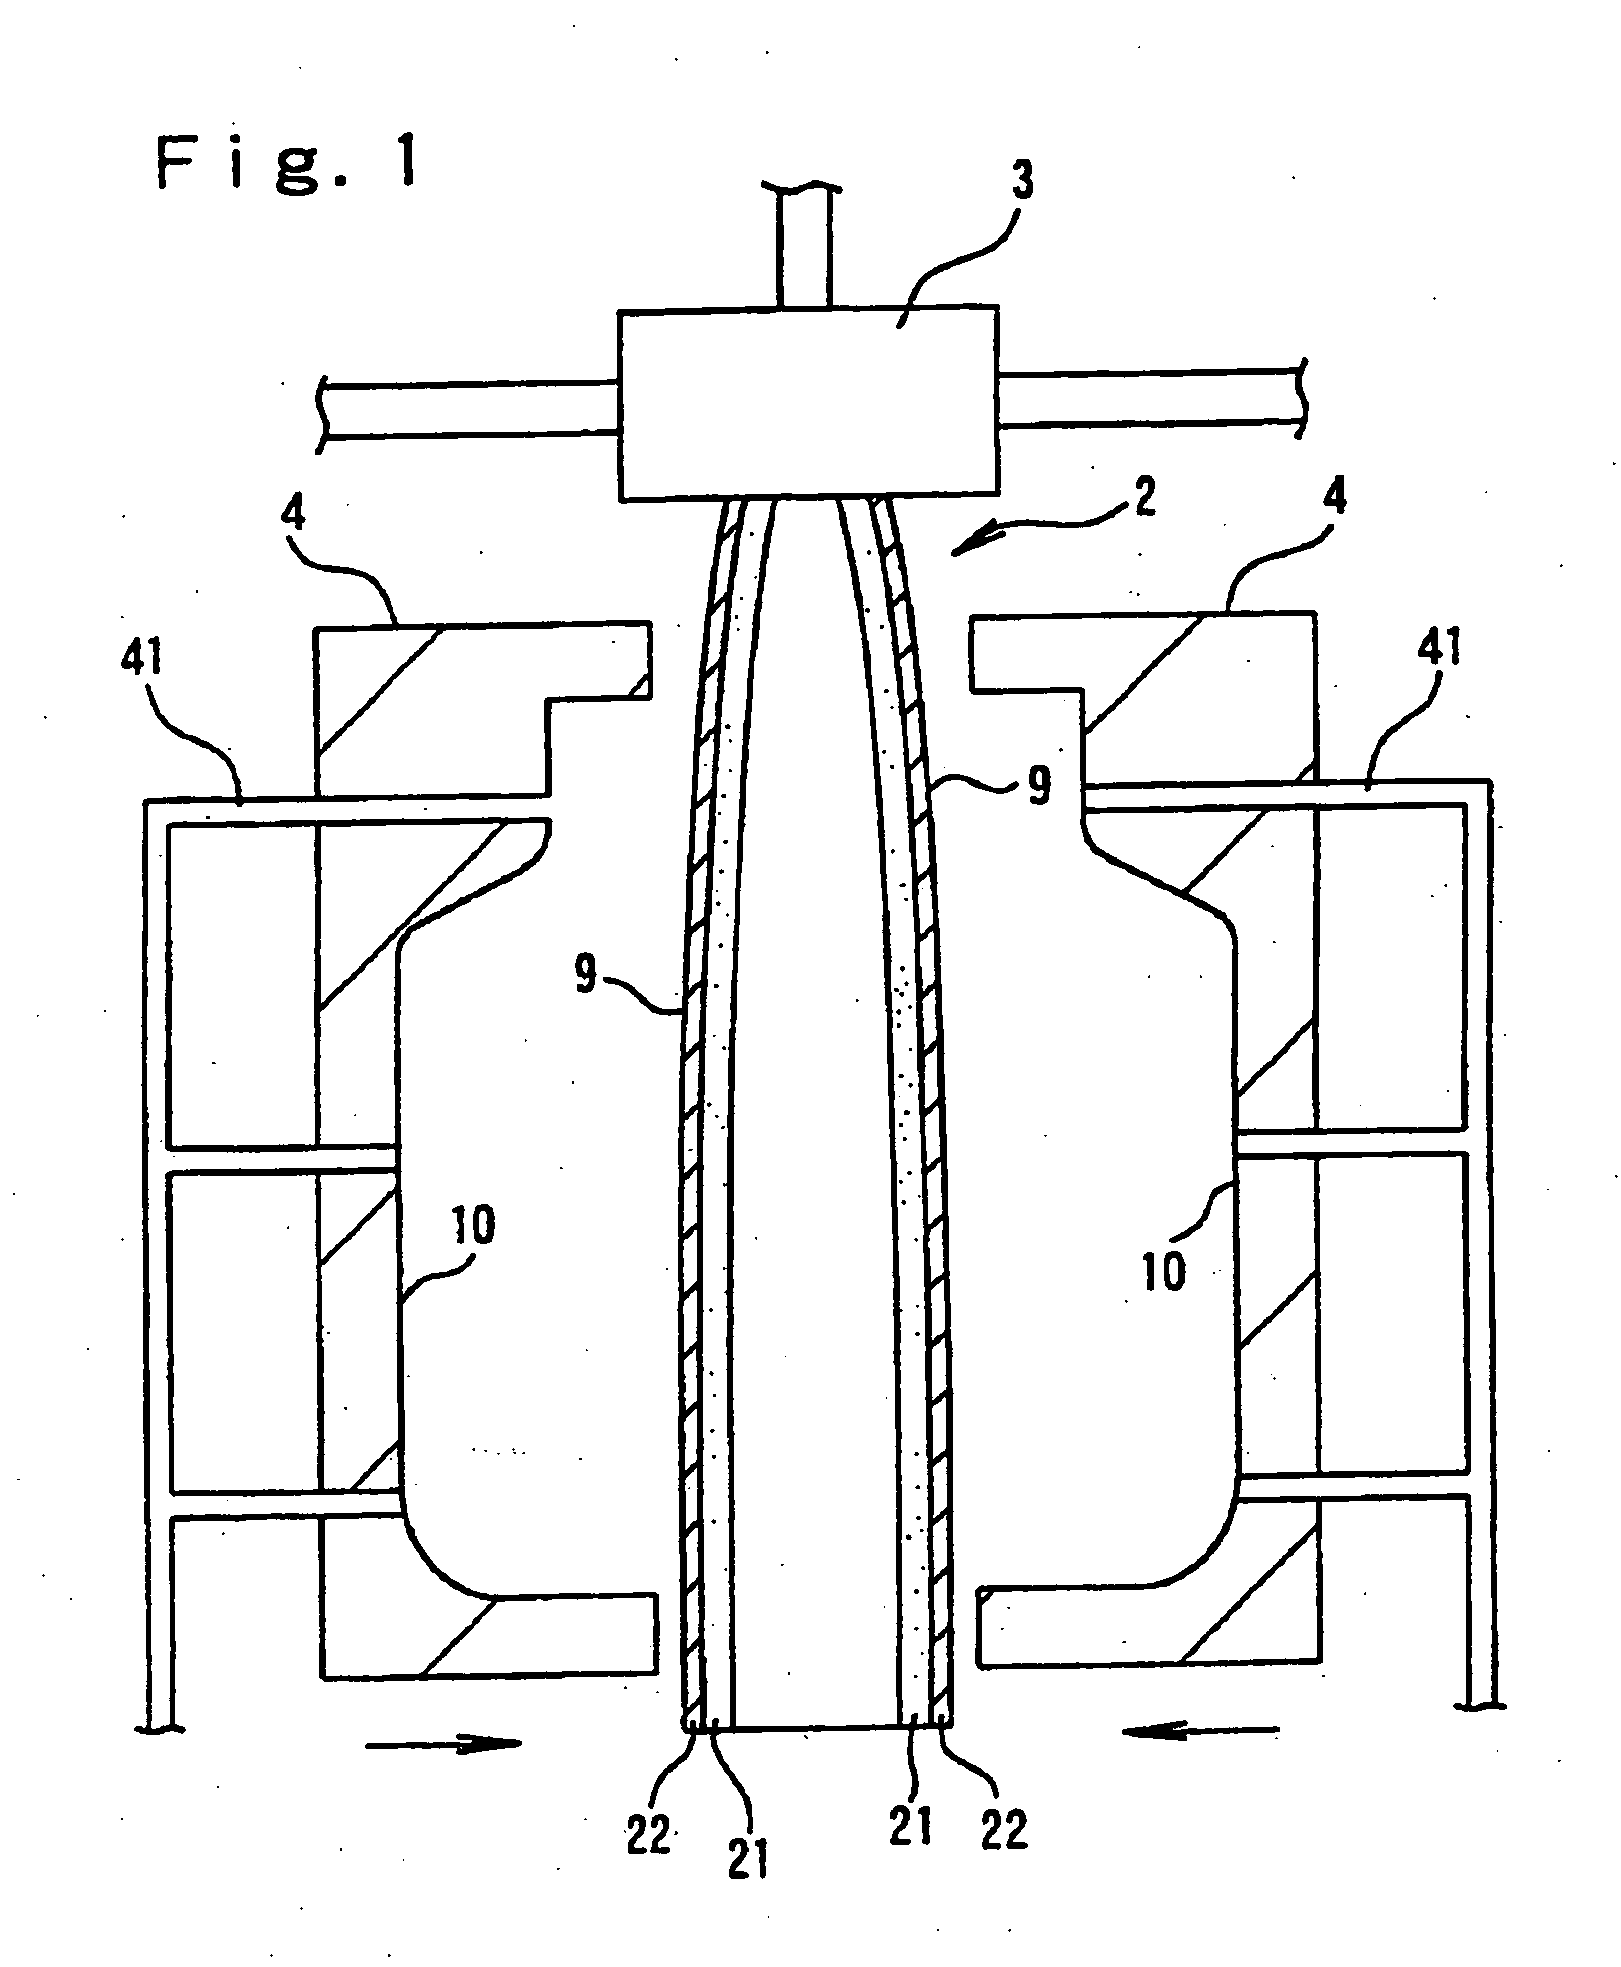 Polypropylene resin hollow molded foam article and a process for the production thereof